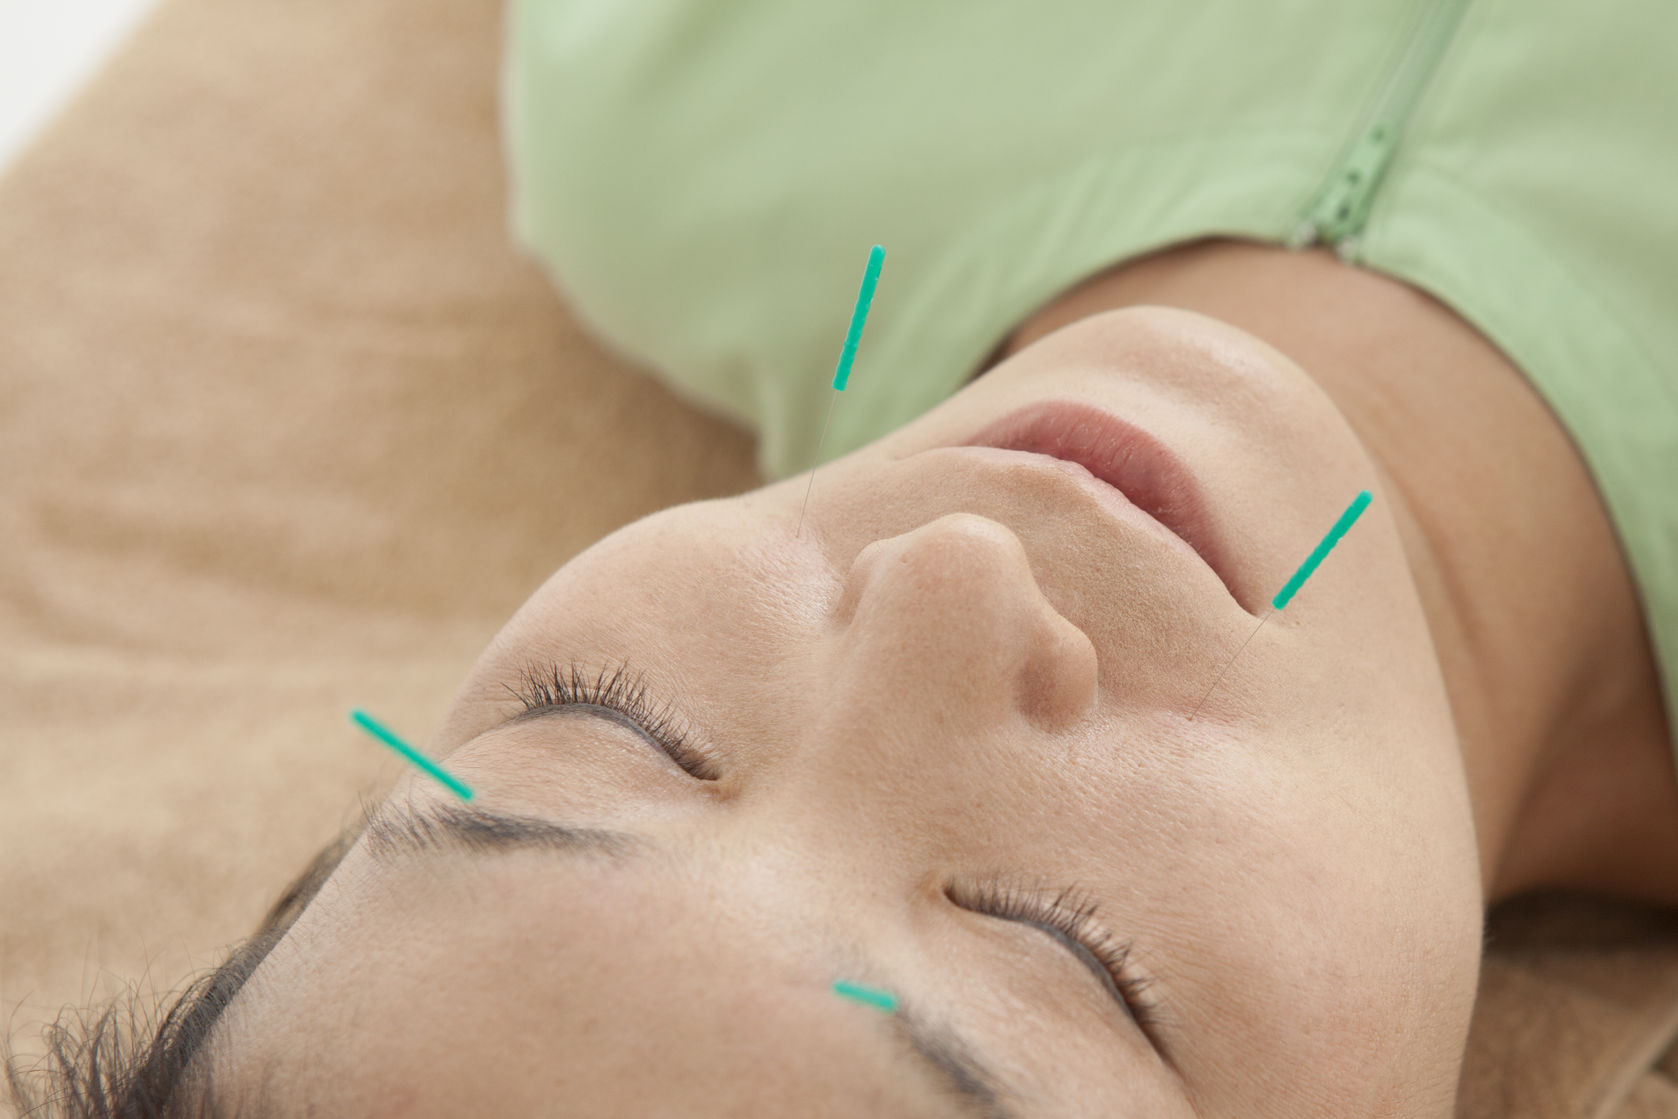 acupuncture is better than drugs for irritable bowel syndrome (IBS)